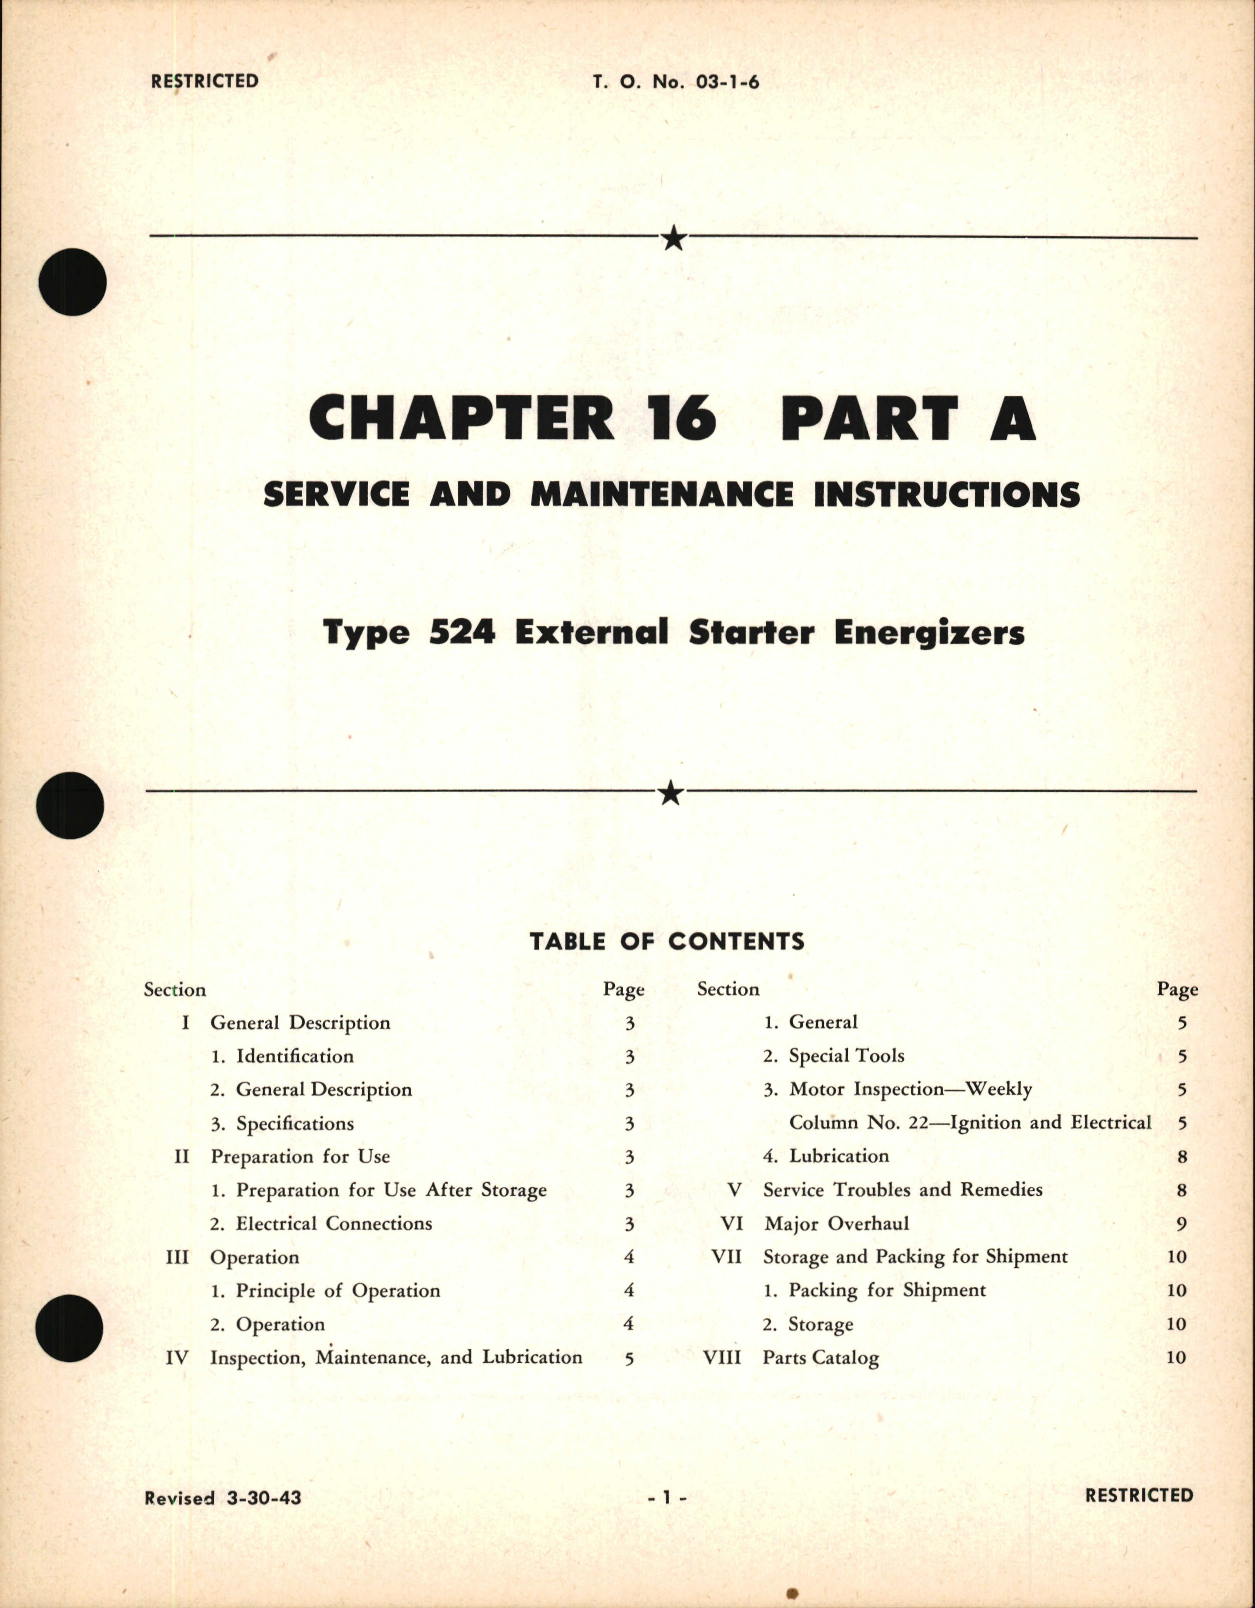 Sample page 1 from AirCorps Library document: Service and Maintenance Instructions for Type 524 External Starter Energizers